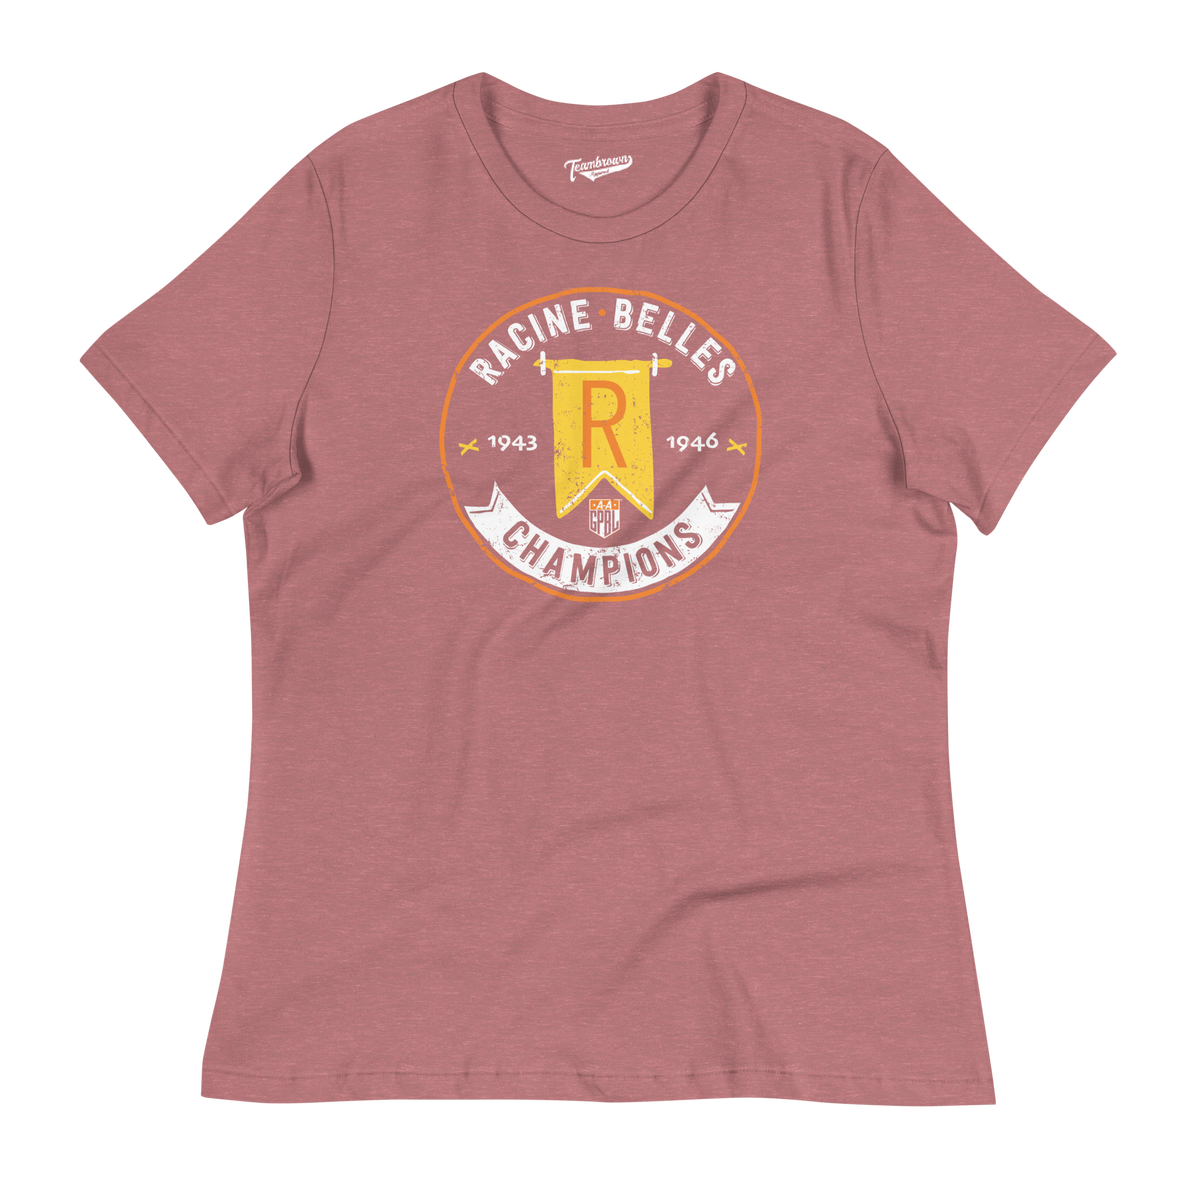 Racine Belles Champions - Women's Relaxed Fit T-Shirt | Officially Licensed - AAGPBL